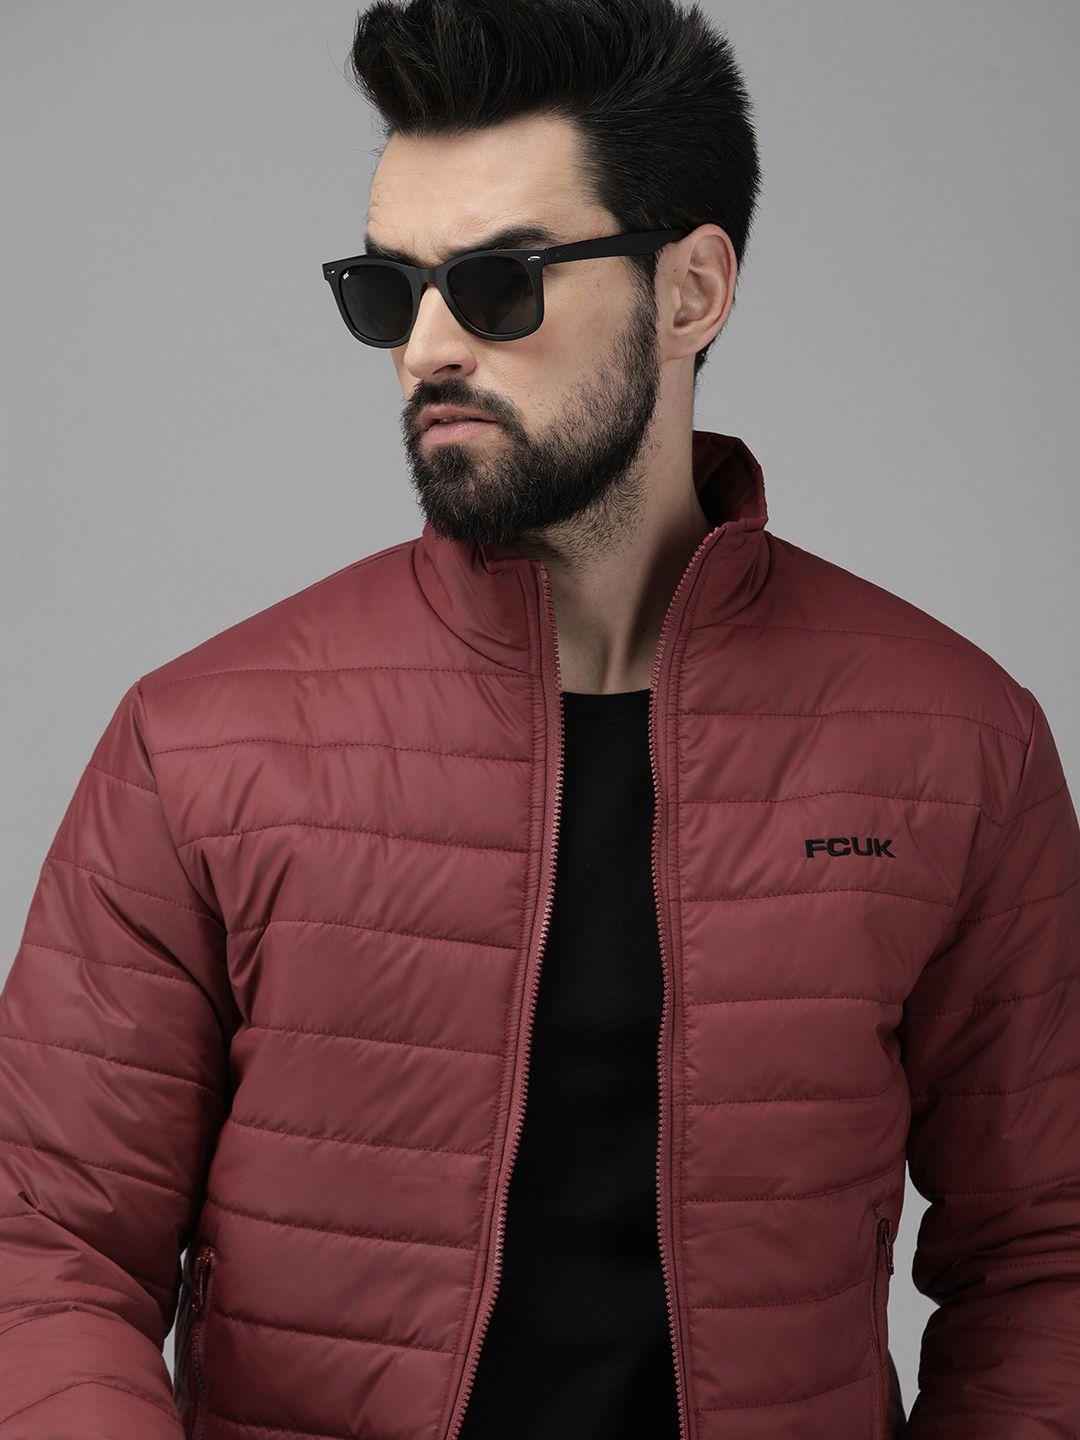 french connection men maroon padded jacket with brand logo embroidered detail